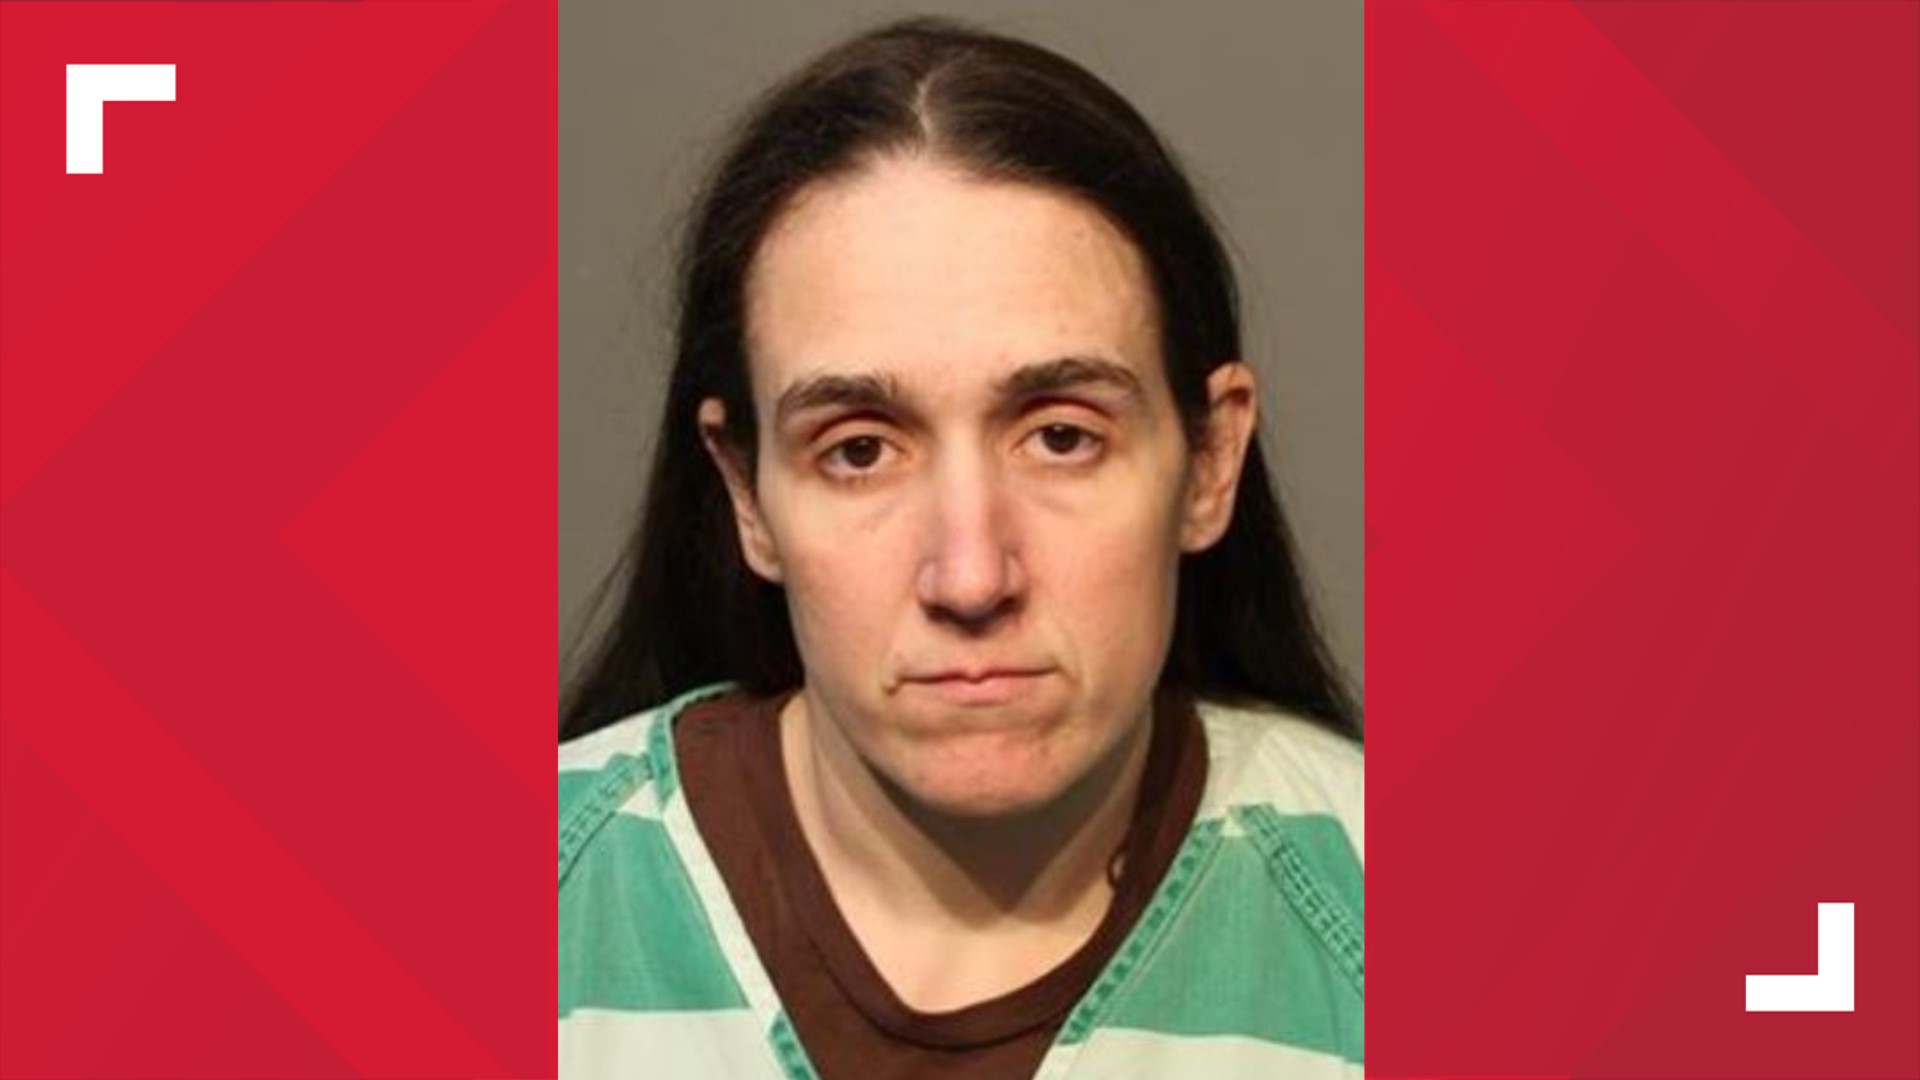 The Ankeny Police Department says their investigation found that 34-year-old Rachel Whiteside sexually exploited and abused a student from 2015-2018.